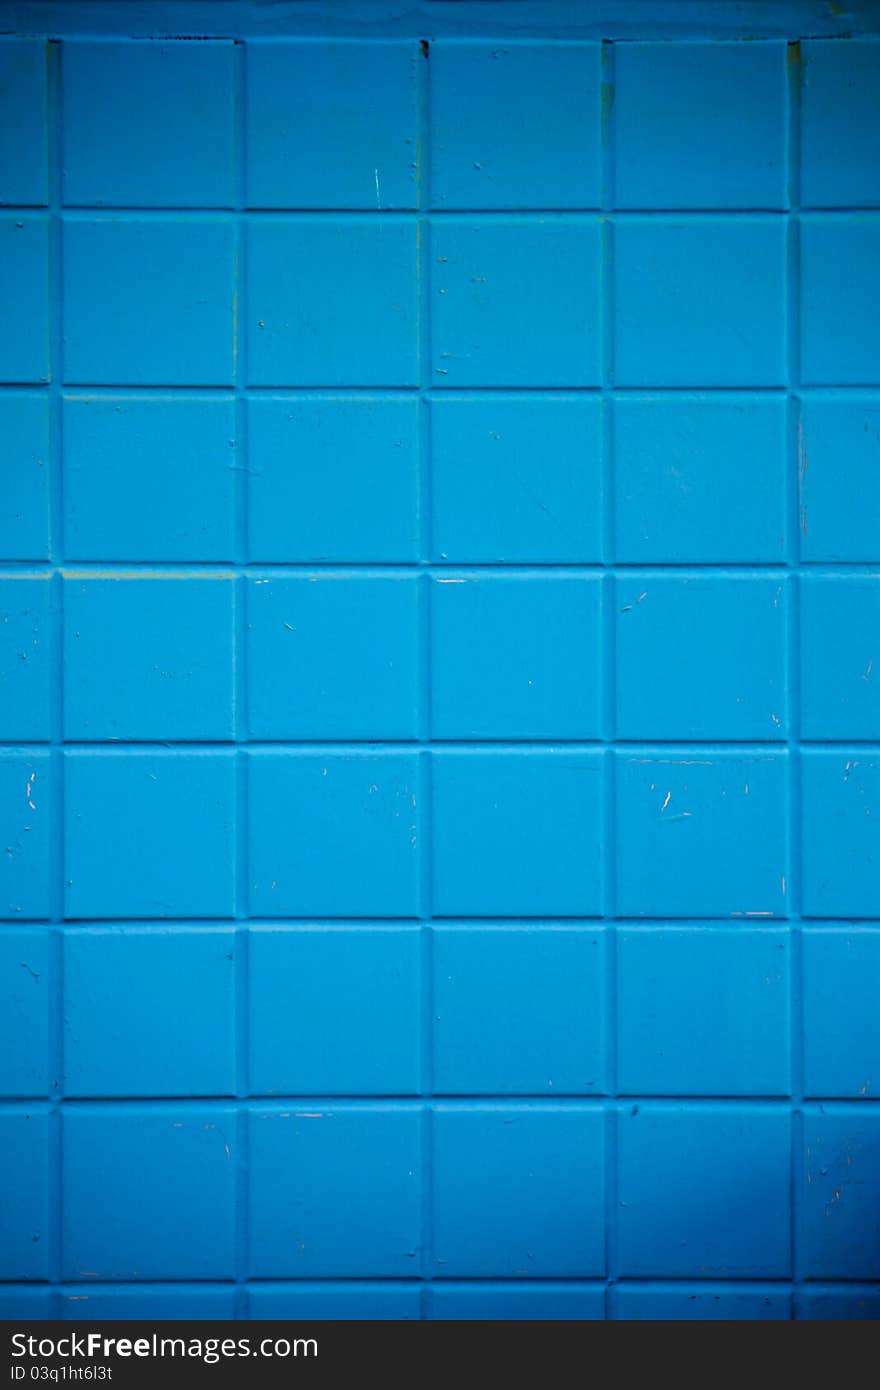 Blue Painted Brick Wall Background. Blue Painted Brick Wall Background